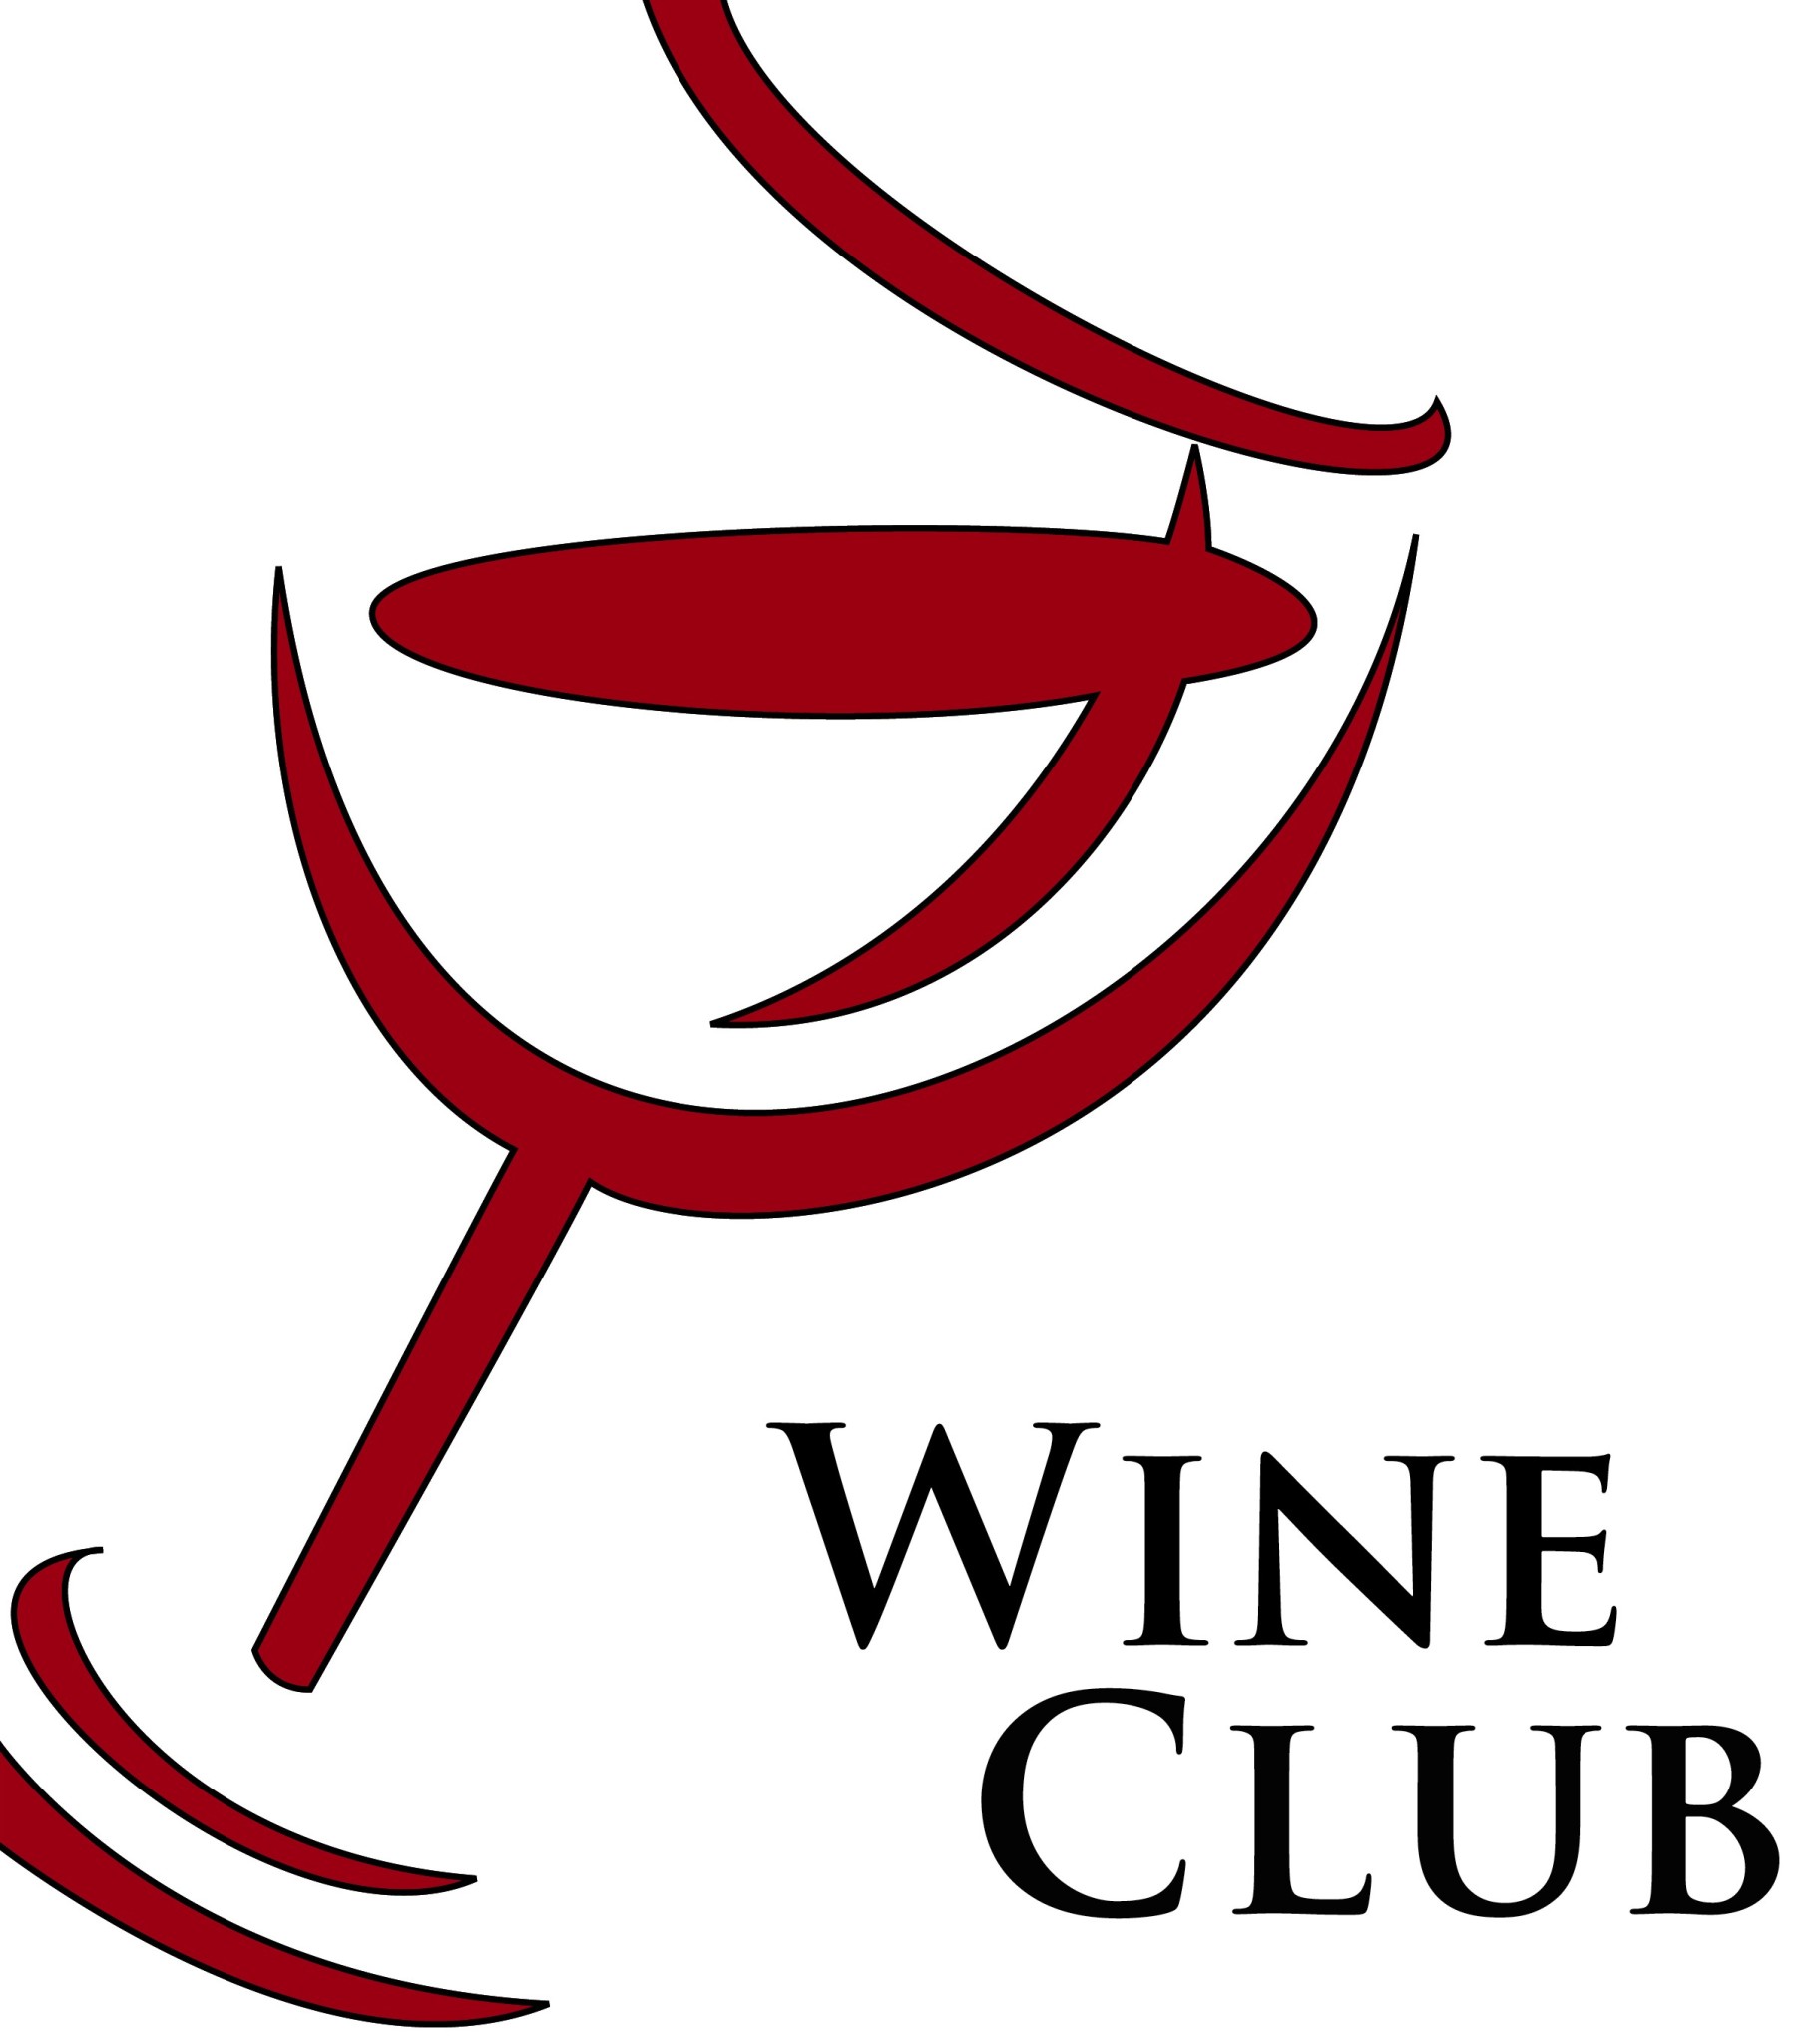 Experience WineTastic Wine Clubs - One for every budget!